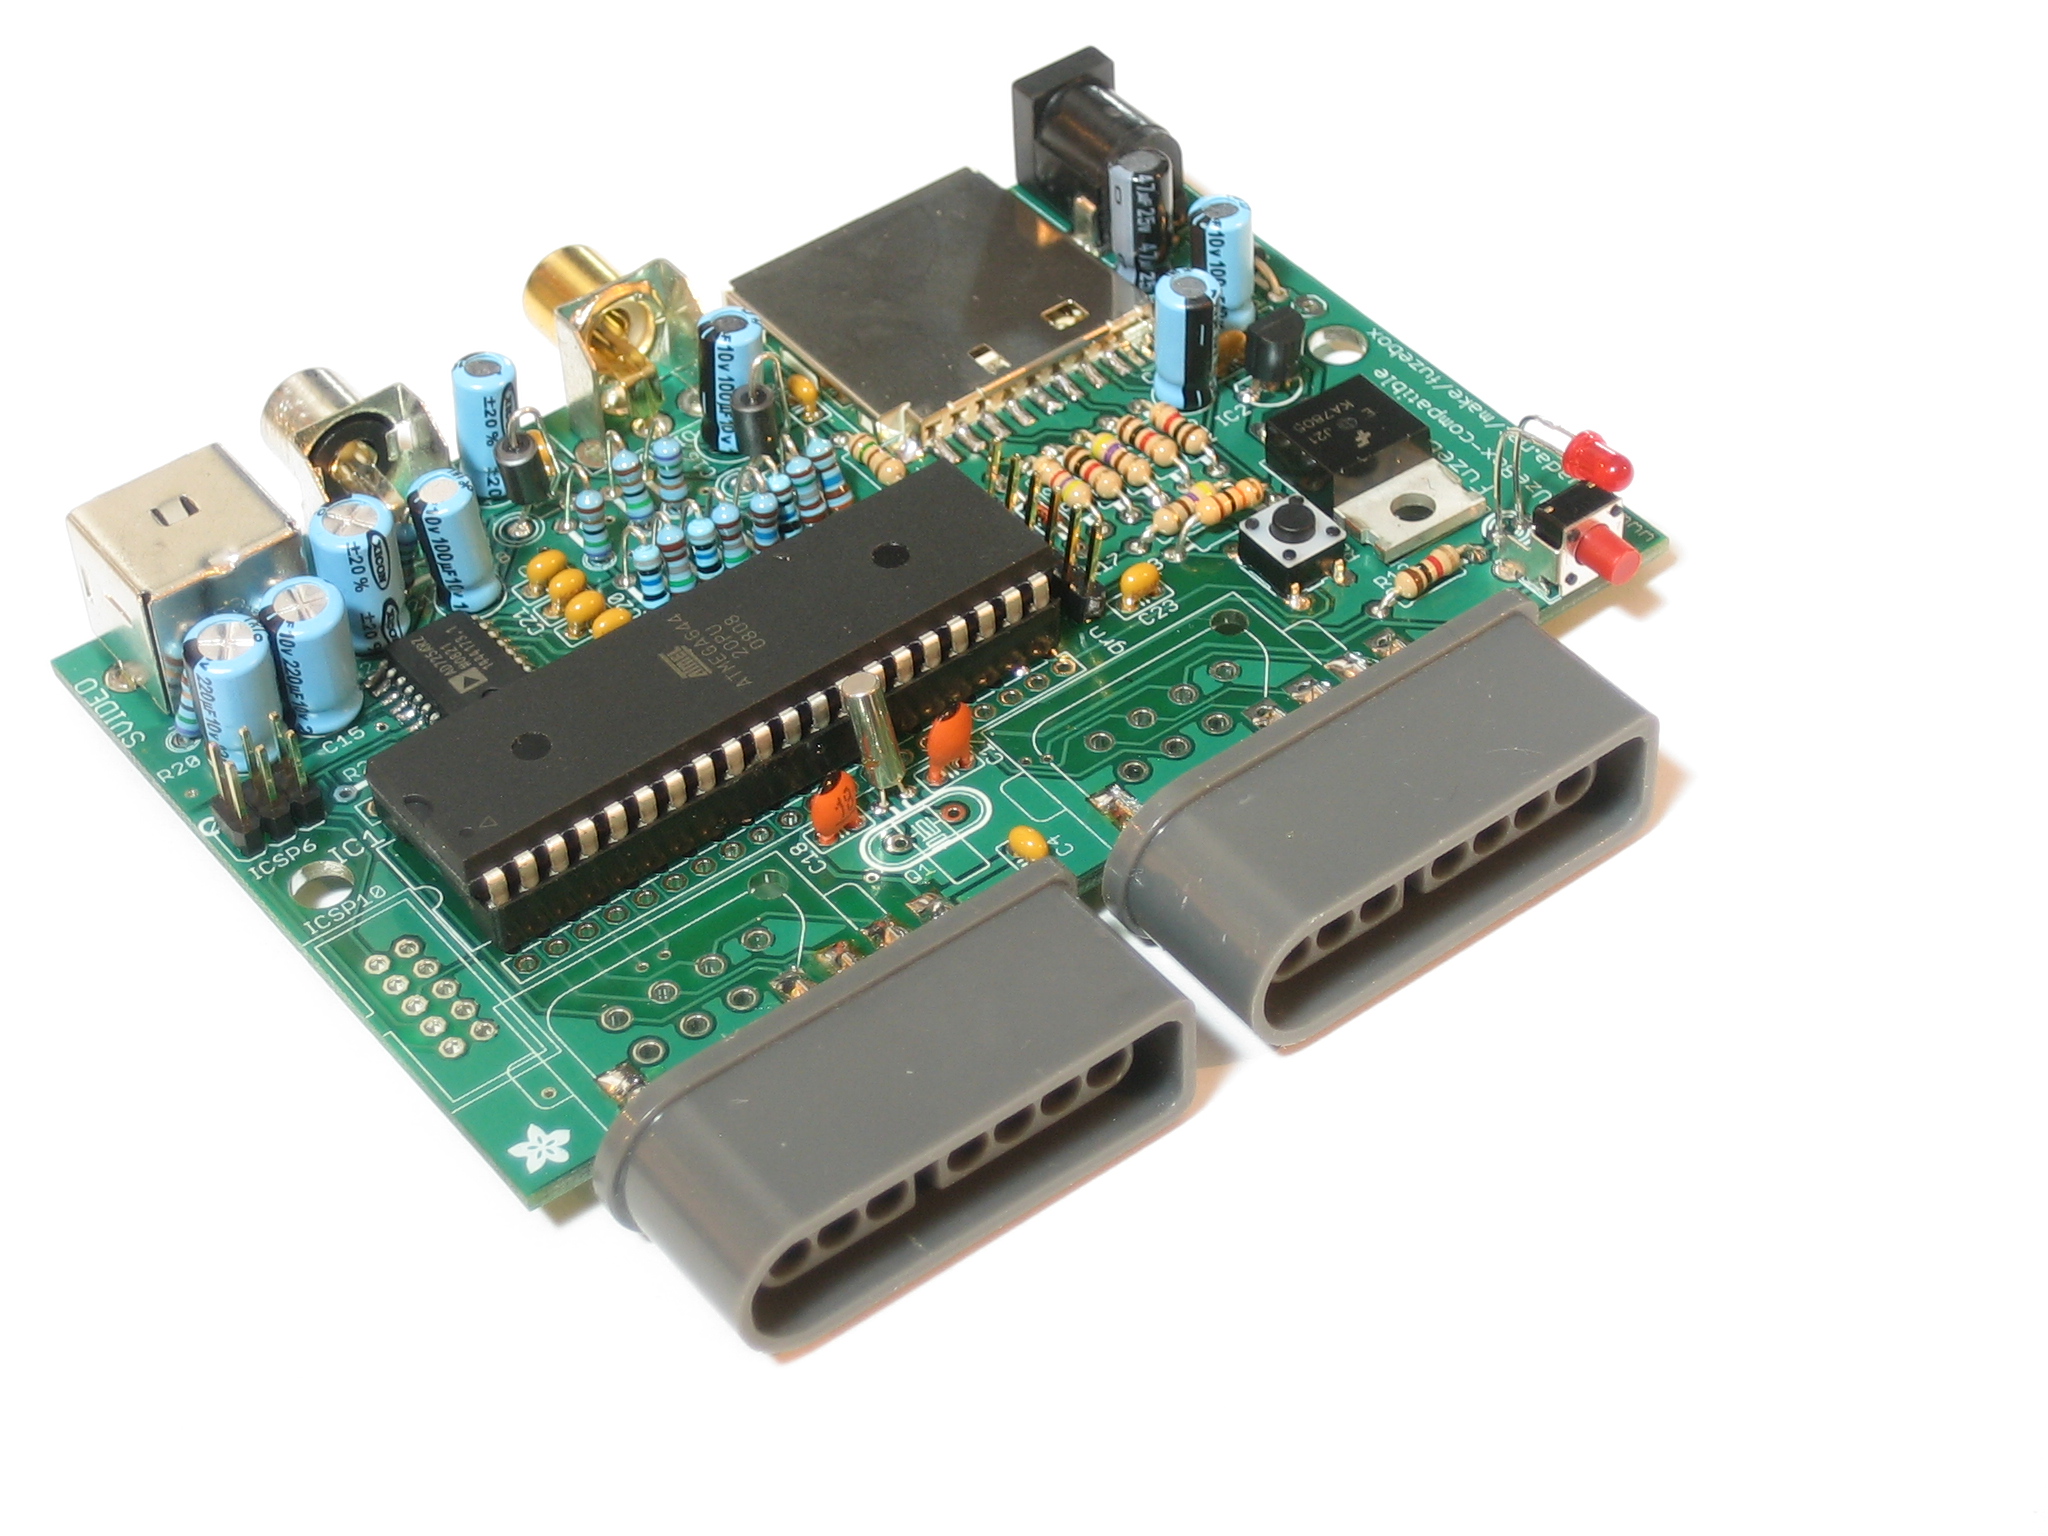 the components are displayed on this board